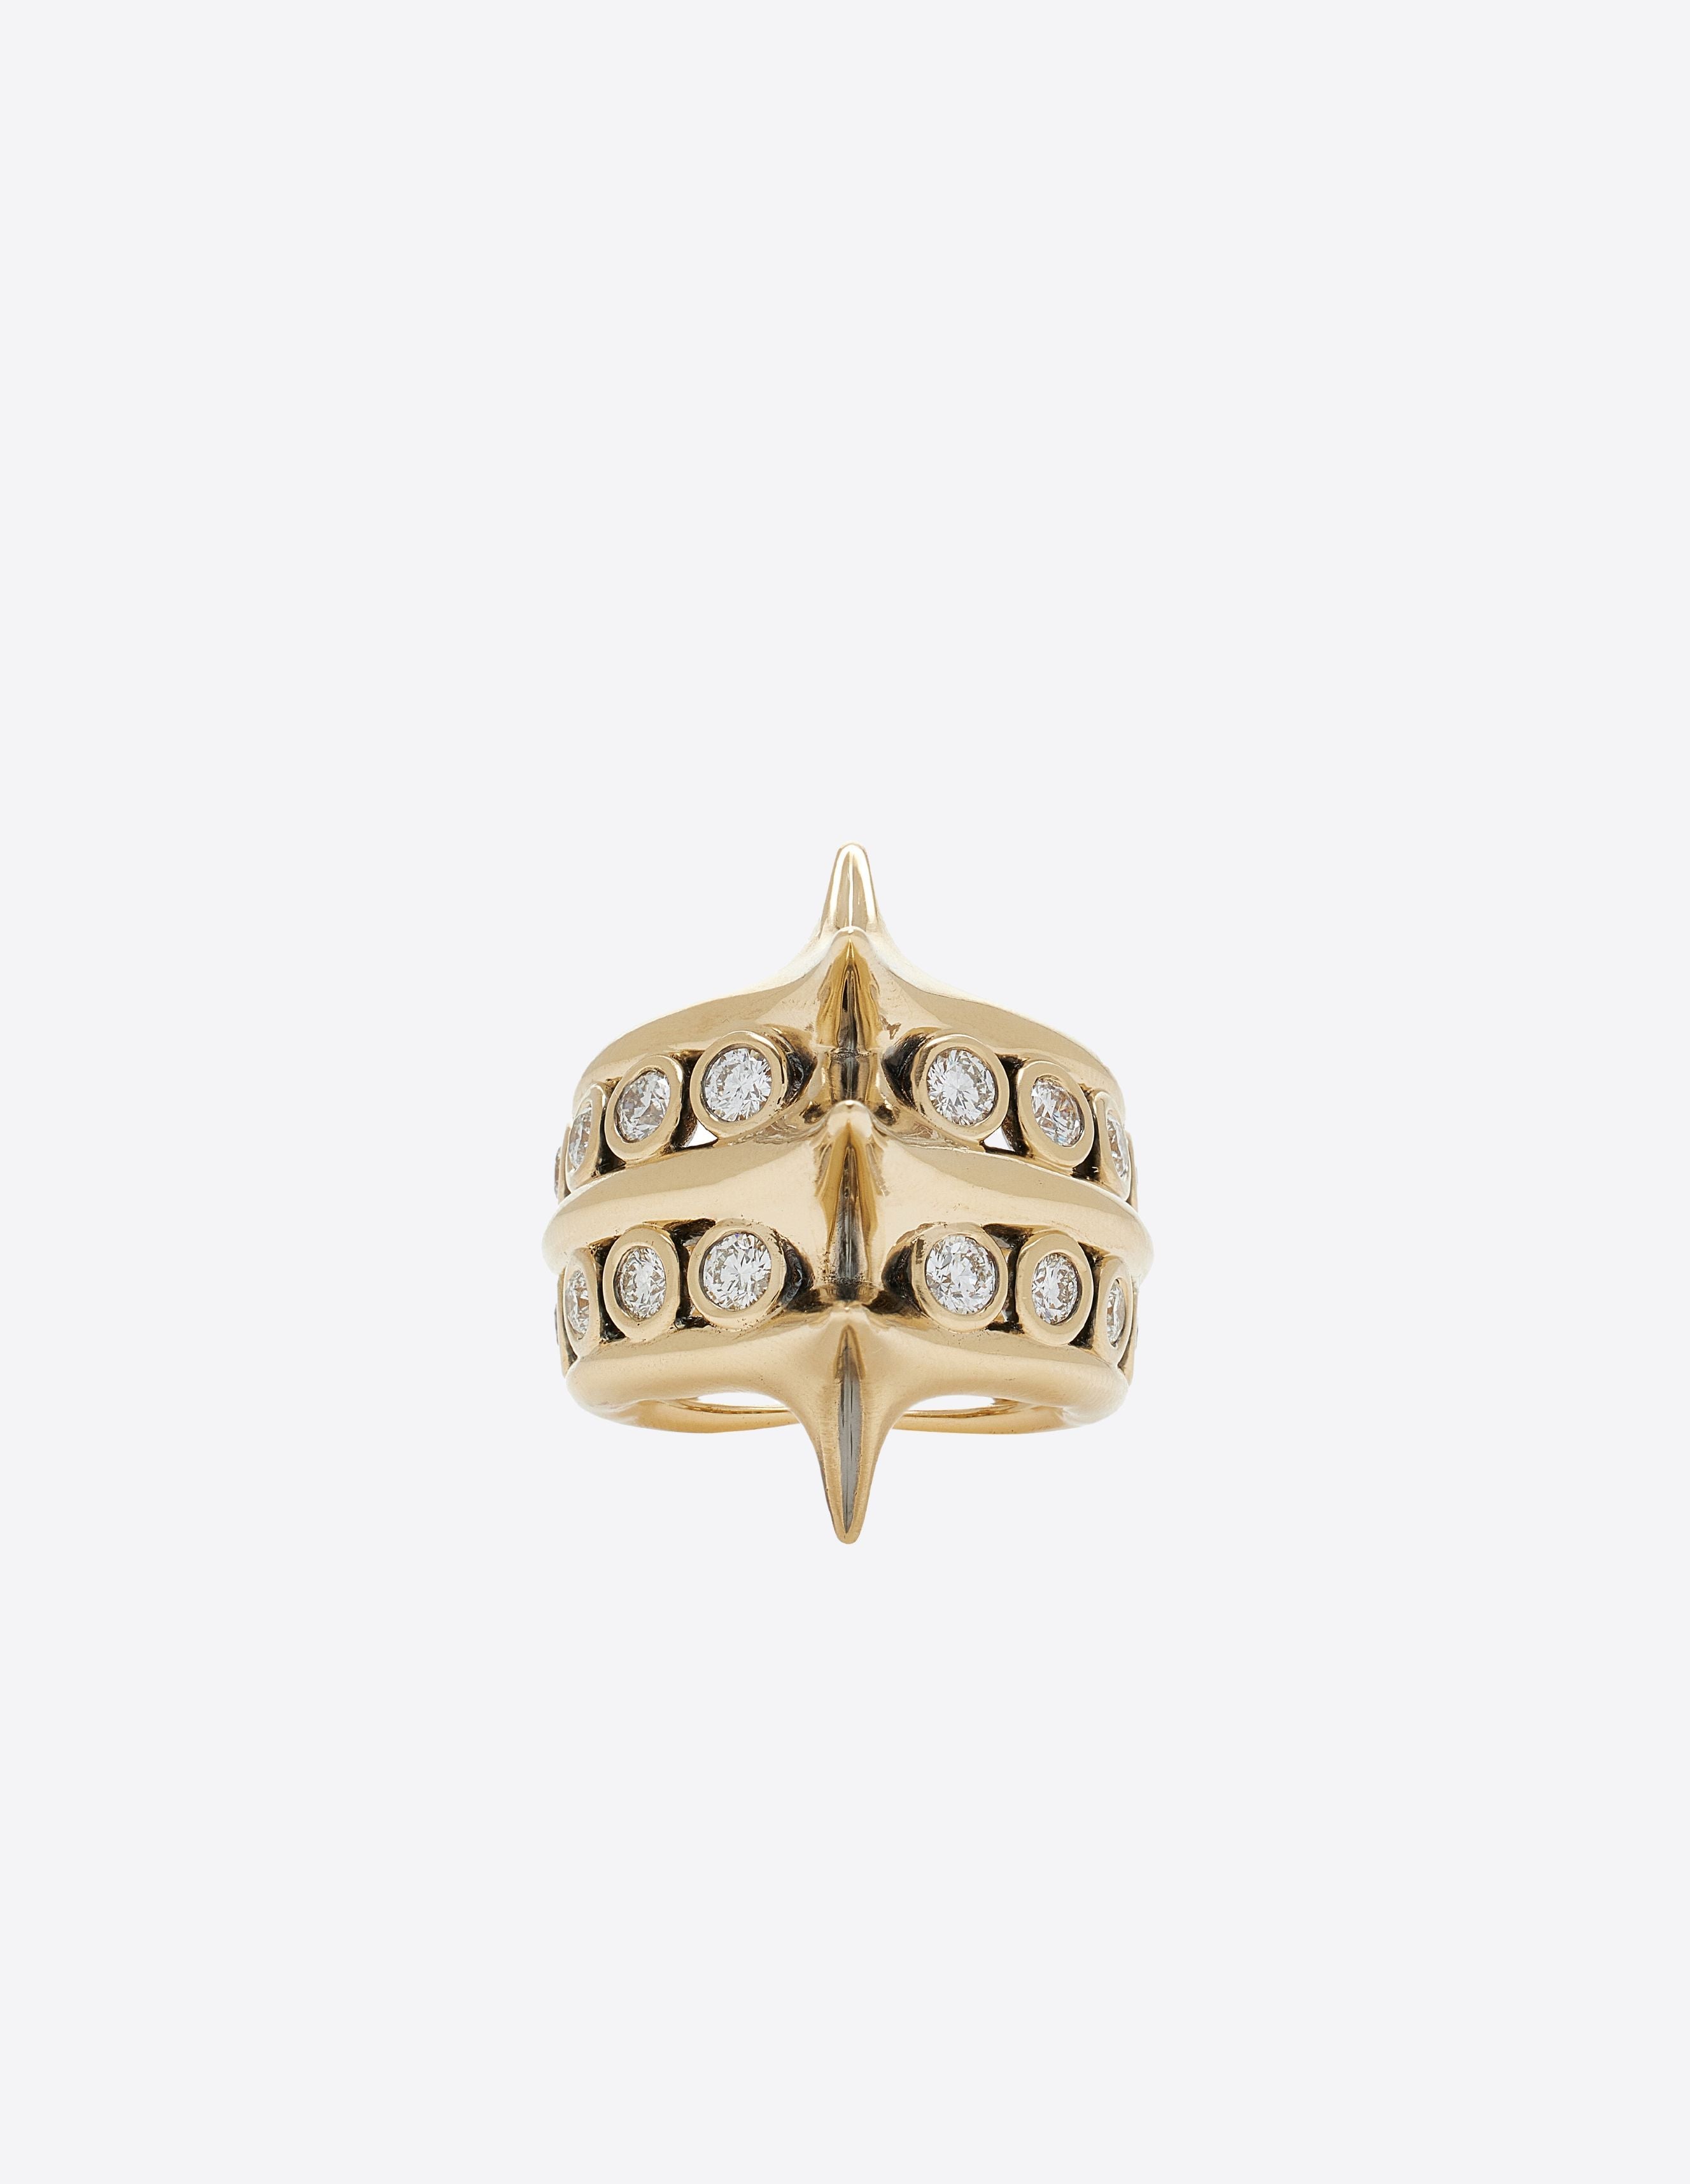 Spike Network Ring in 18K Yellow Gold with Diamonds